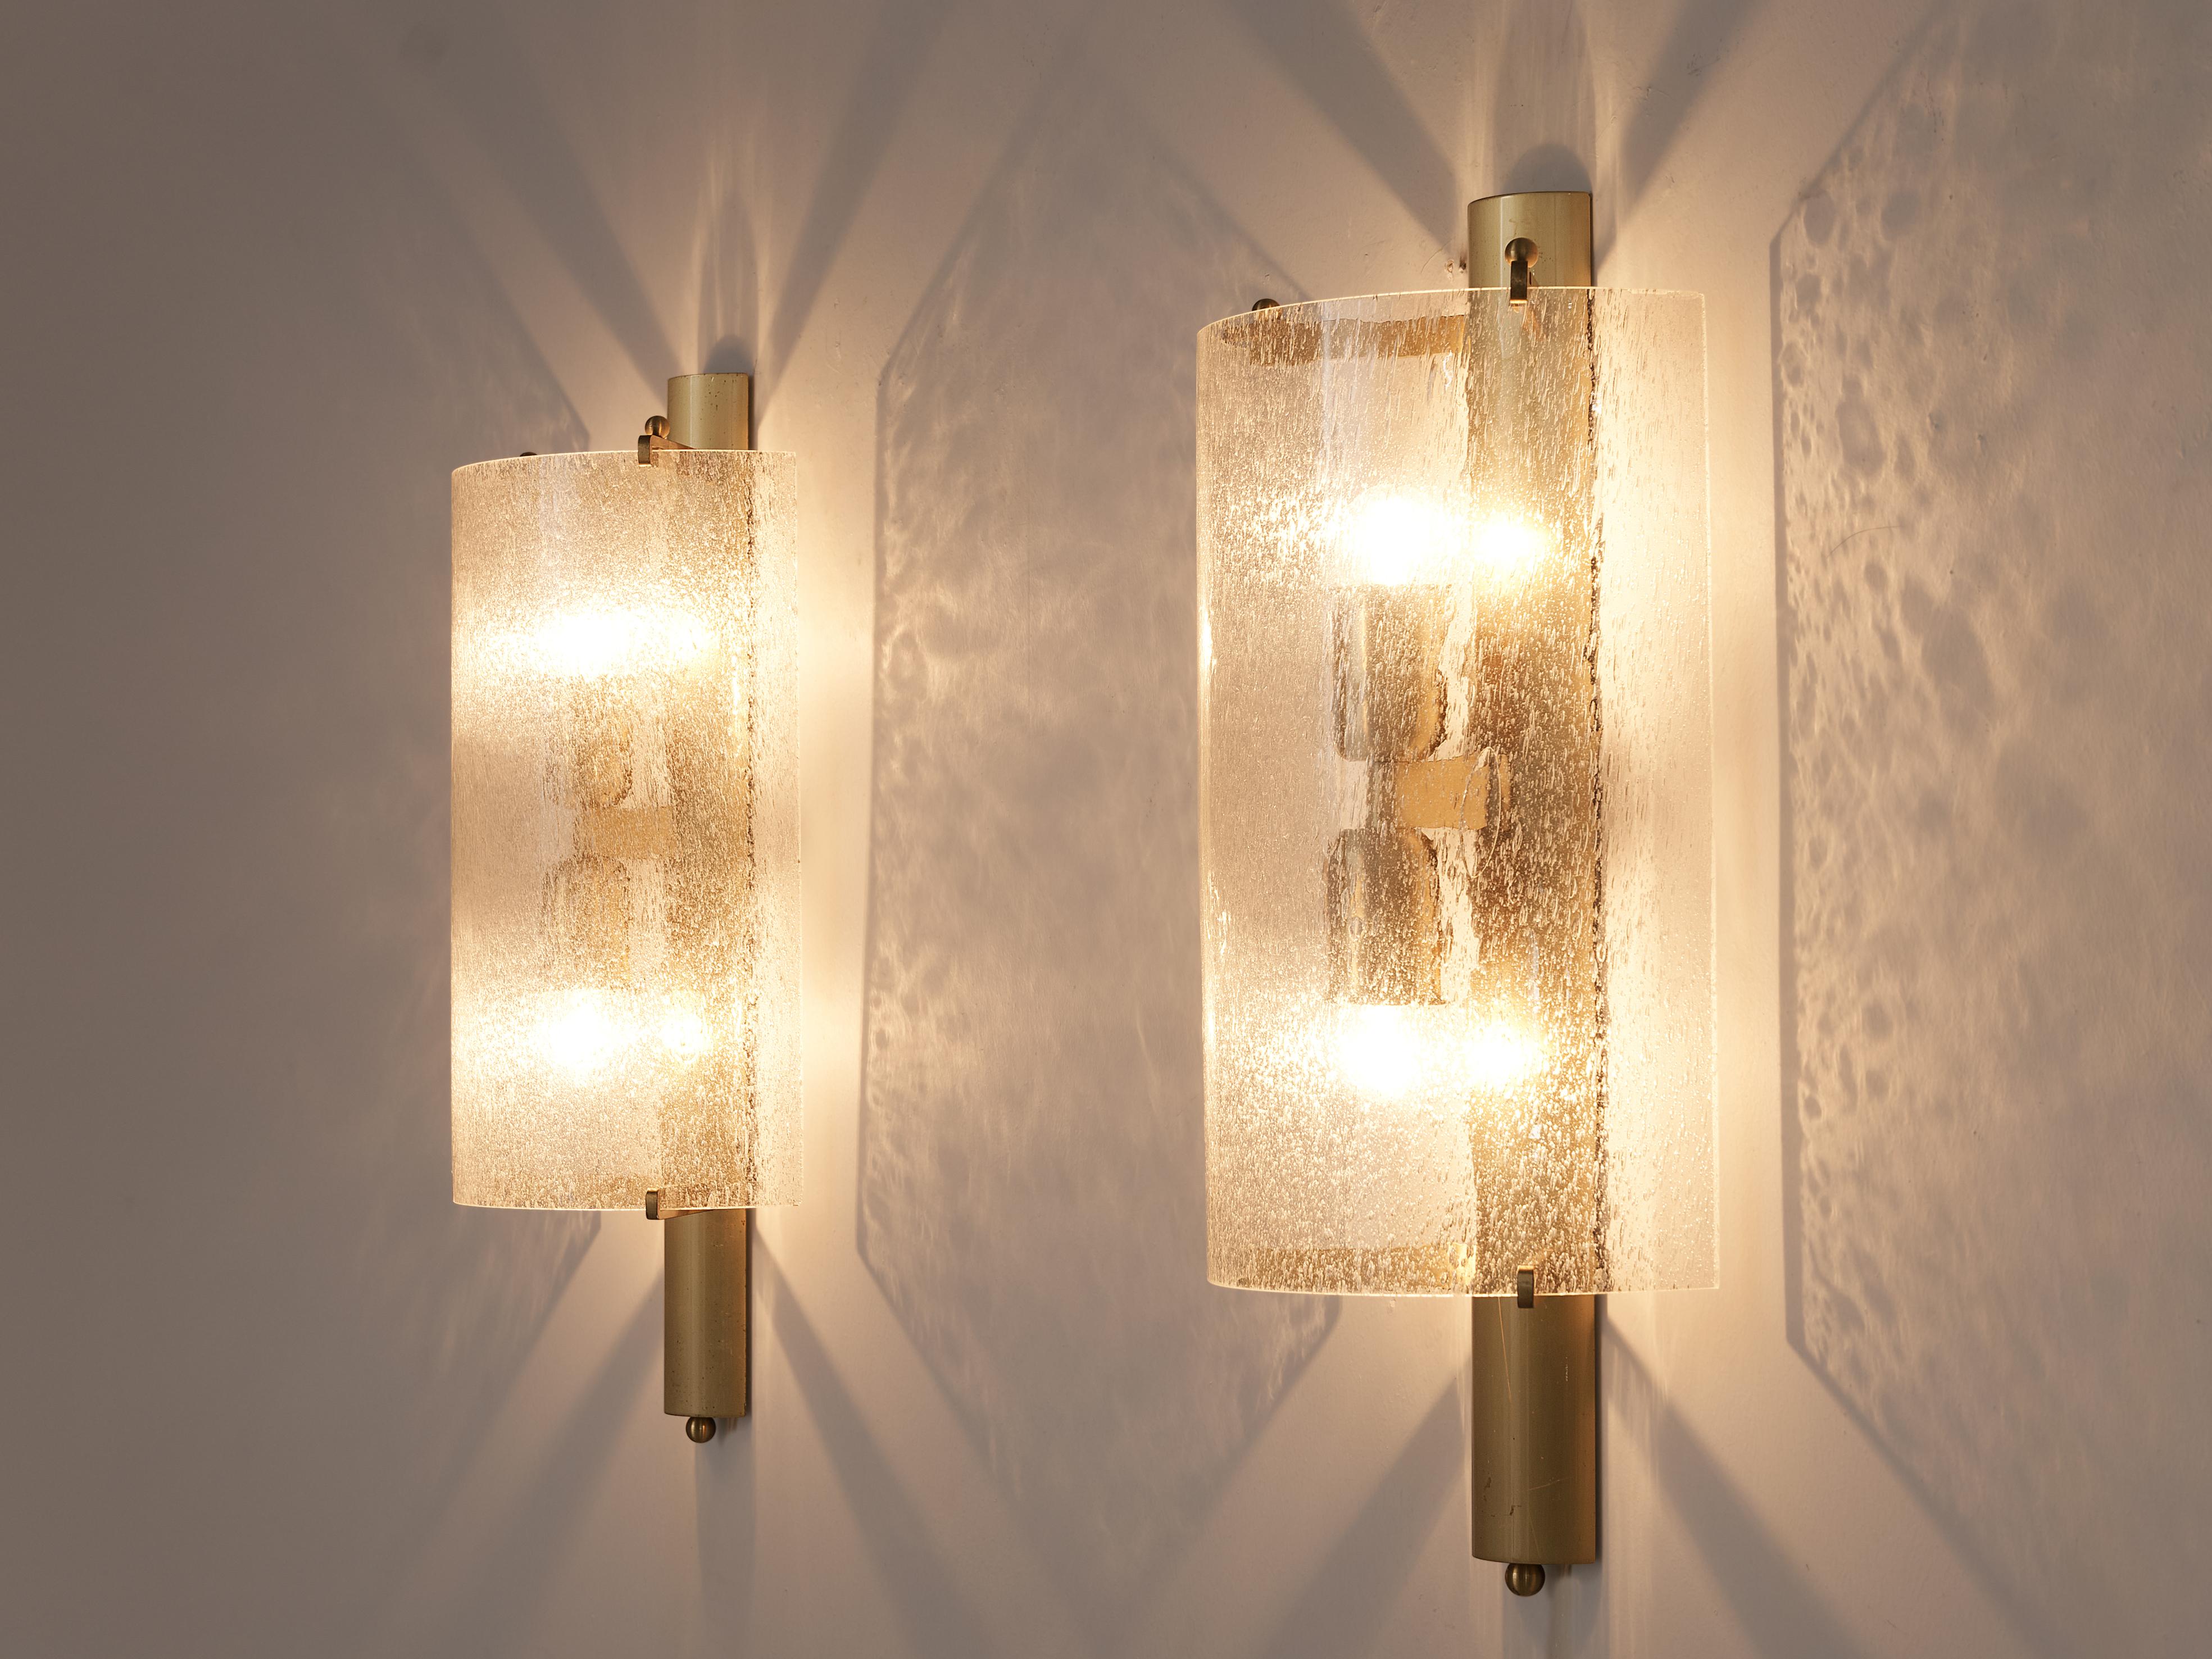 Wall lights, brass, glass, Europe, 1960s

This pair of solid wall lights has beautifully shaped half circles as shades. The frame is made out of very warm brass. The lights work nicely individually yet function very well as a pair too. The quality